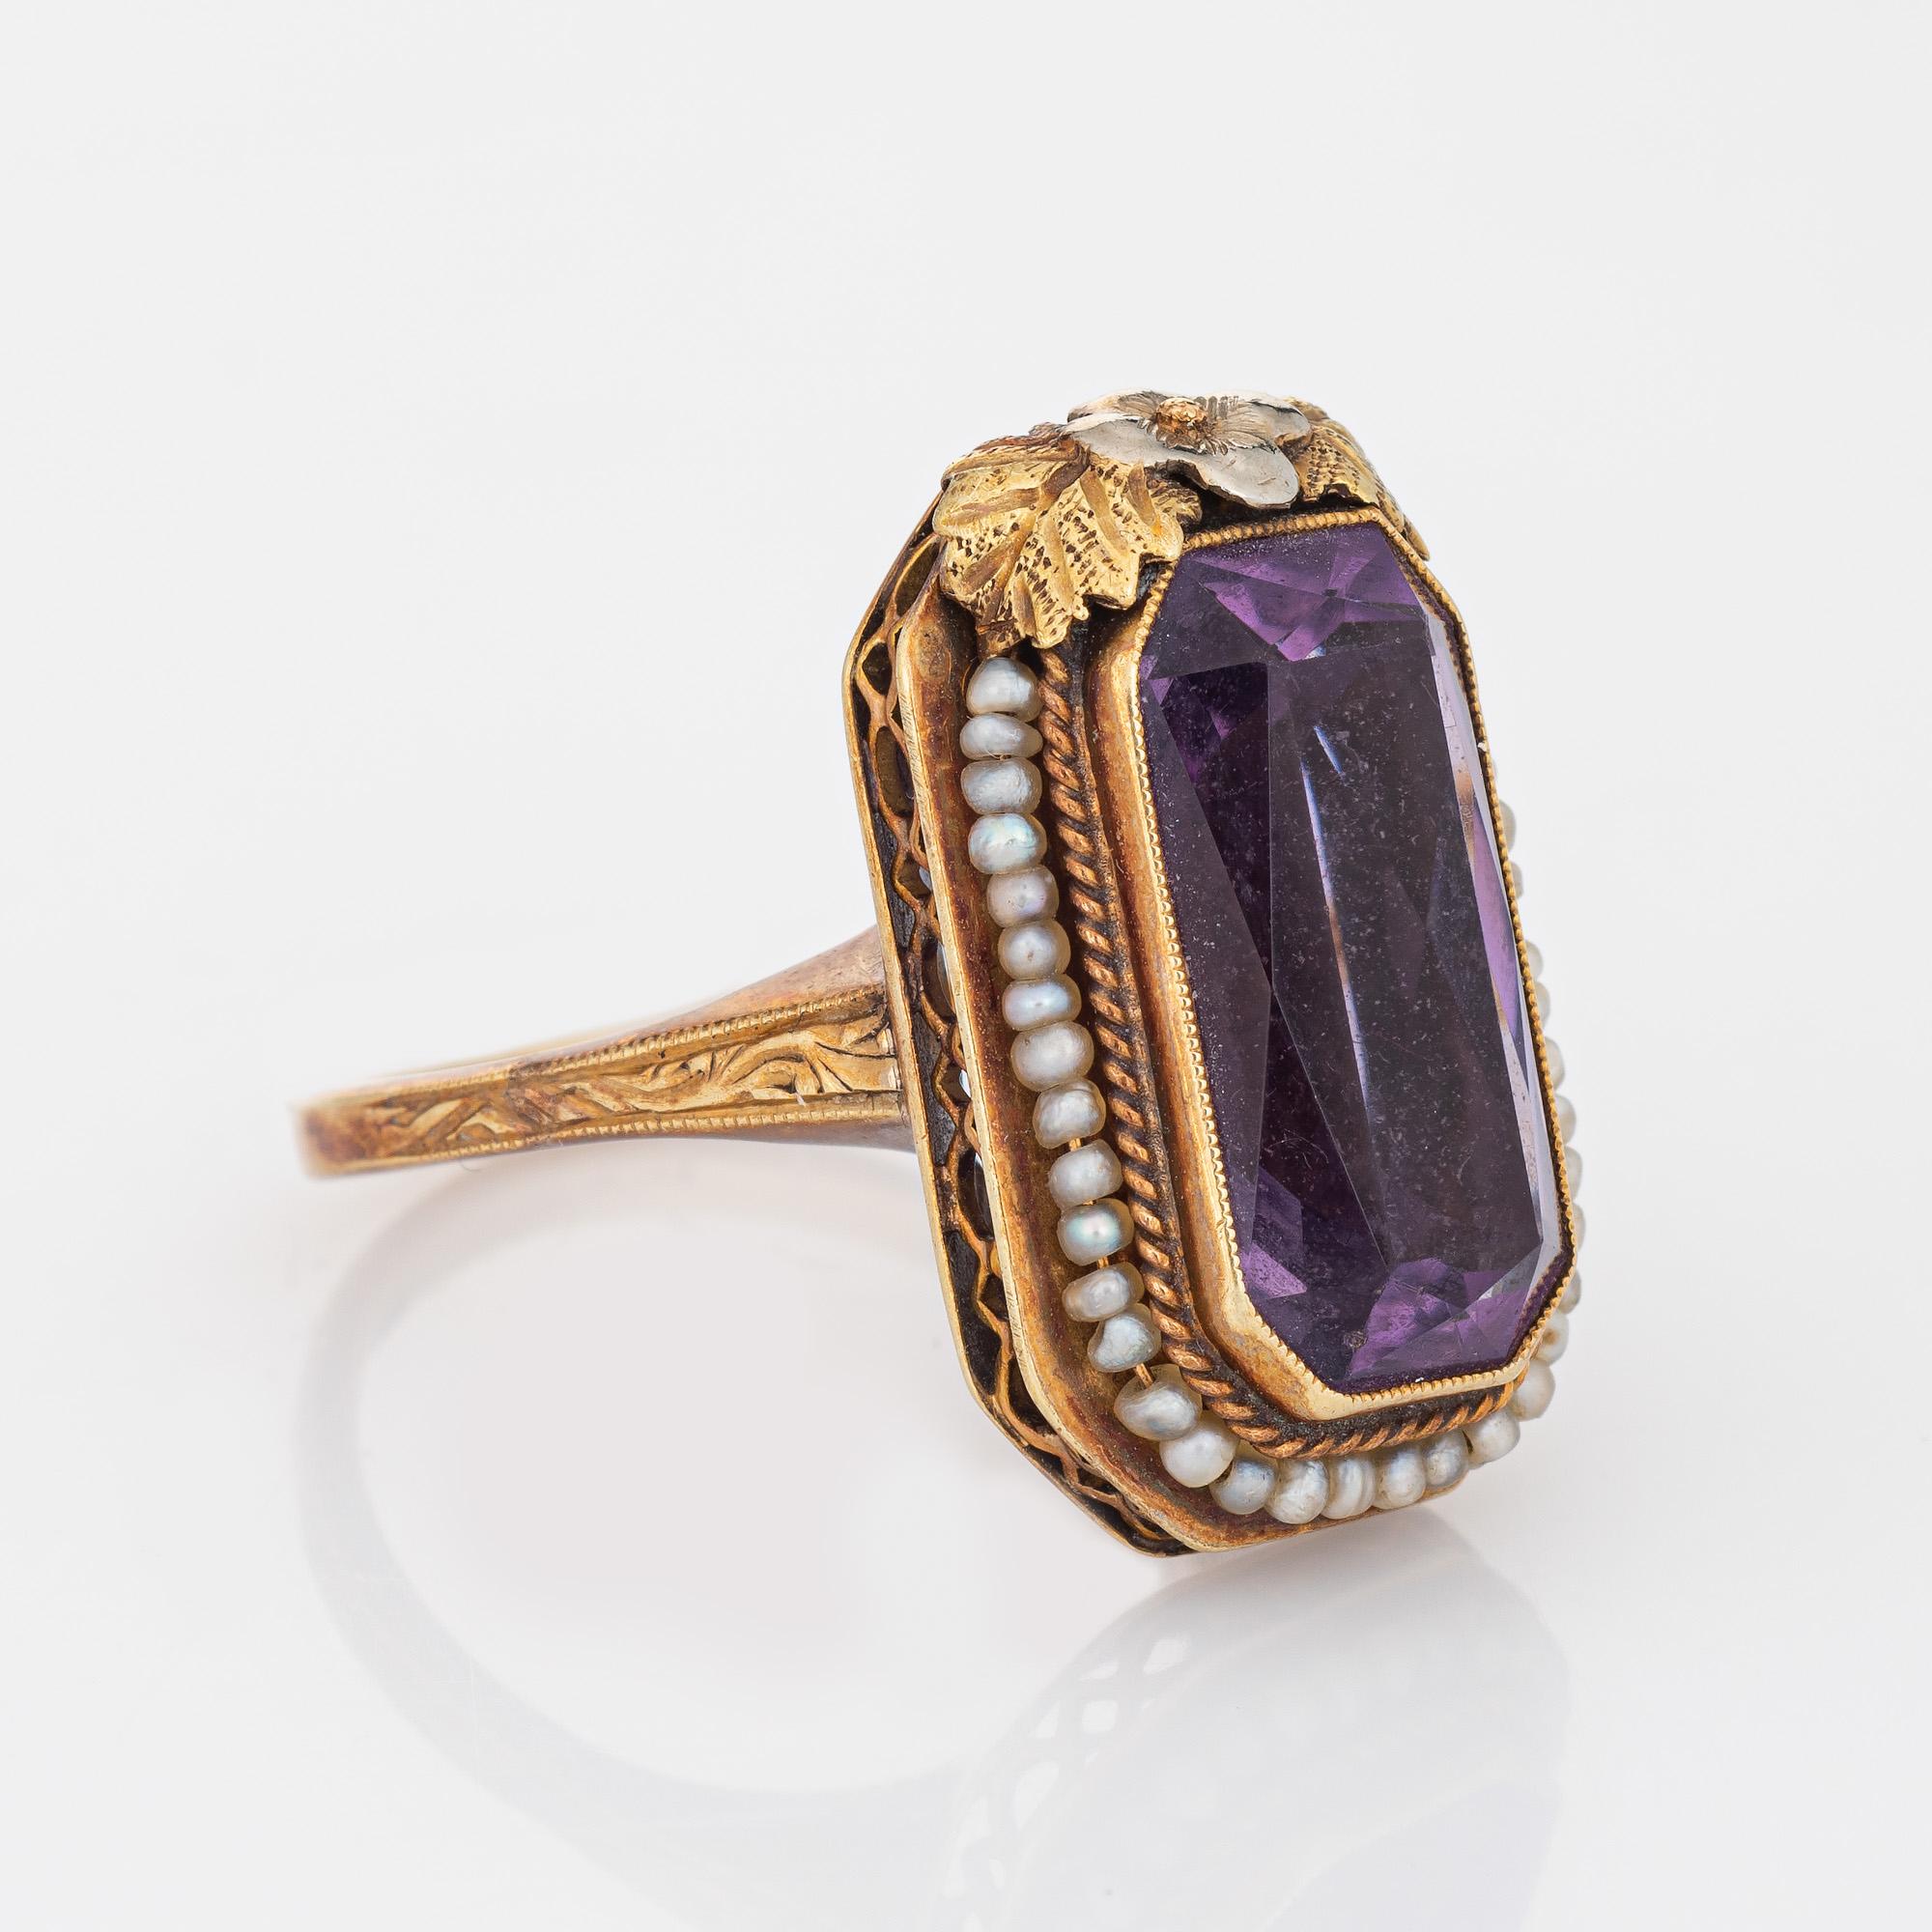 Square Cut Vintage Art Deco Amethyst Ring Seed Pearls 14k Yellow Gold Long Square